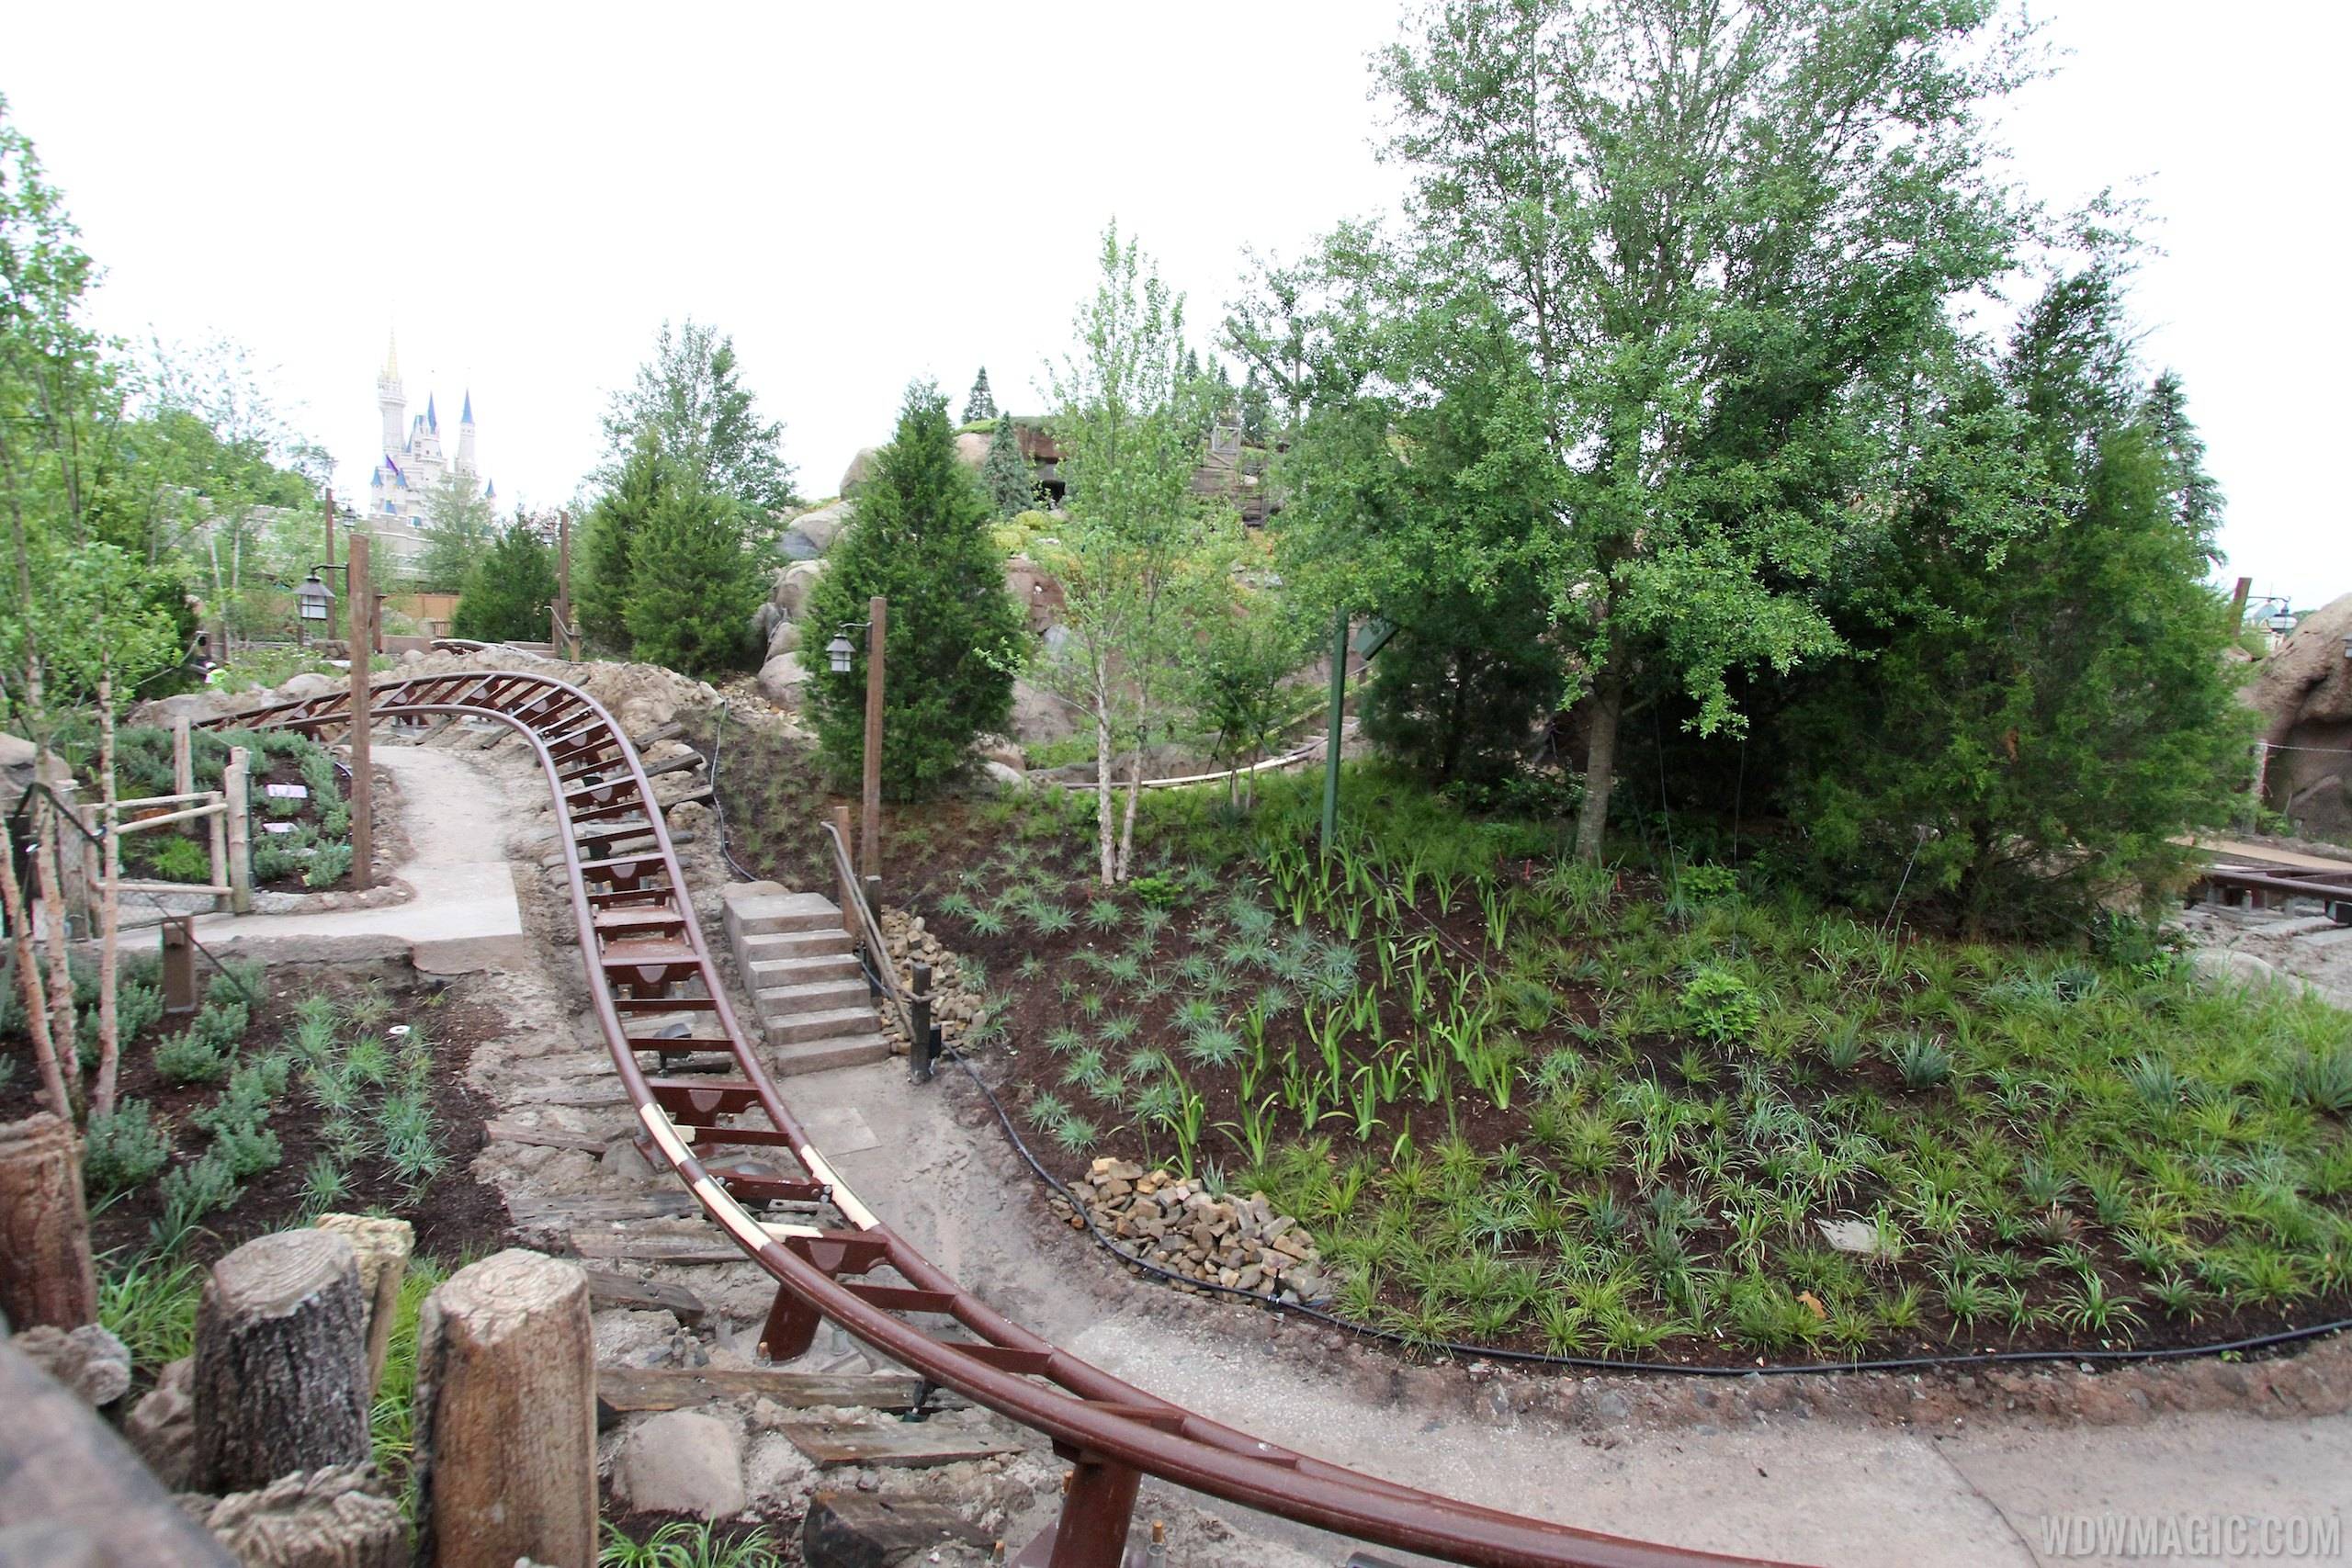 PHOTOS - More walls come down at the Seven Dwarfs Mine Train as opening edges closer